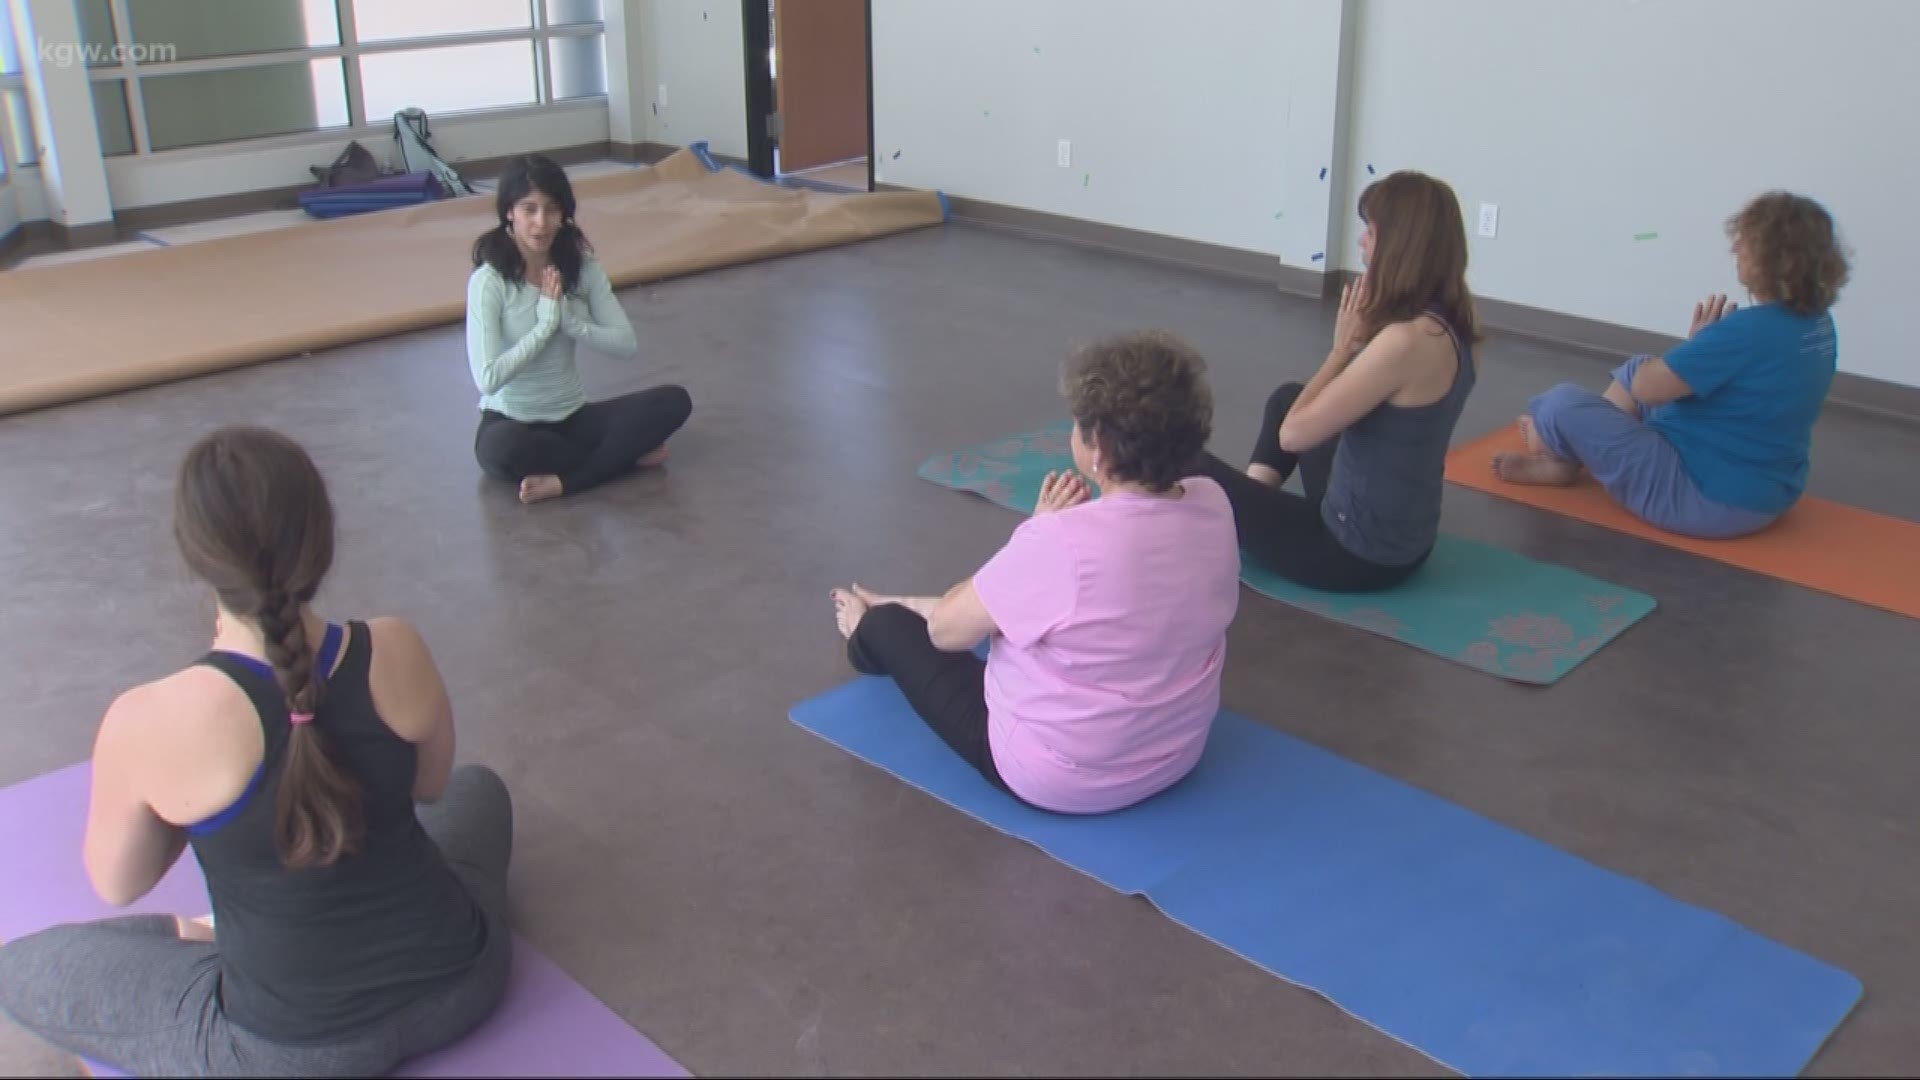 Yoga is helping domestic violence survivors heal.